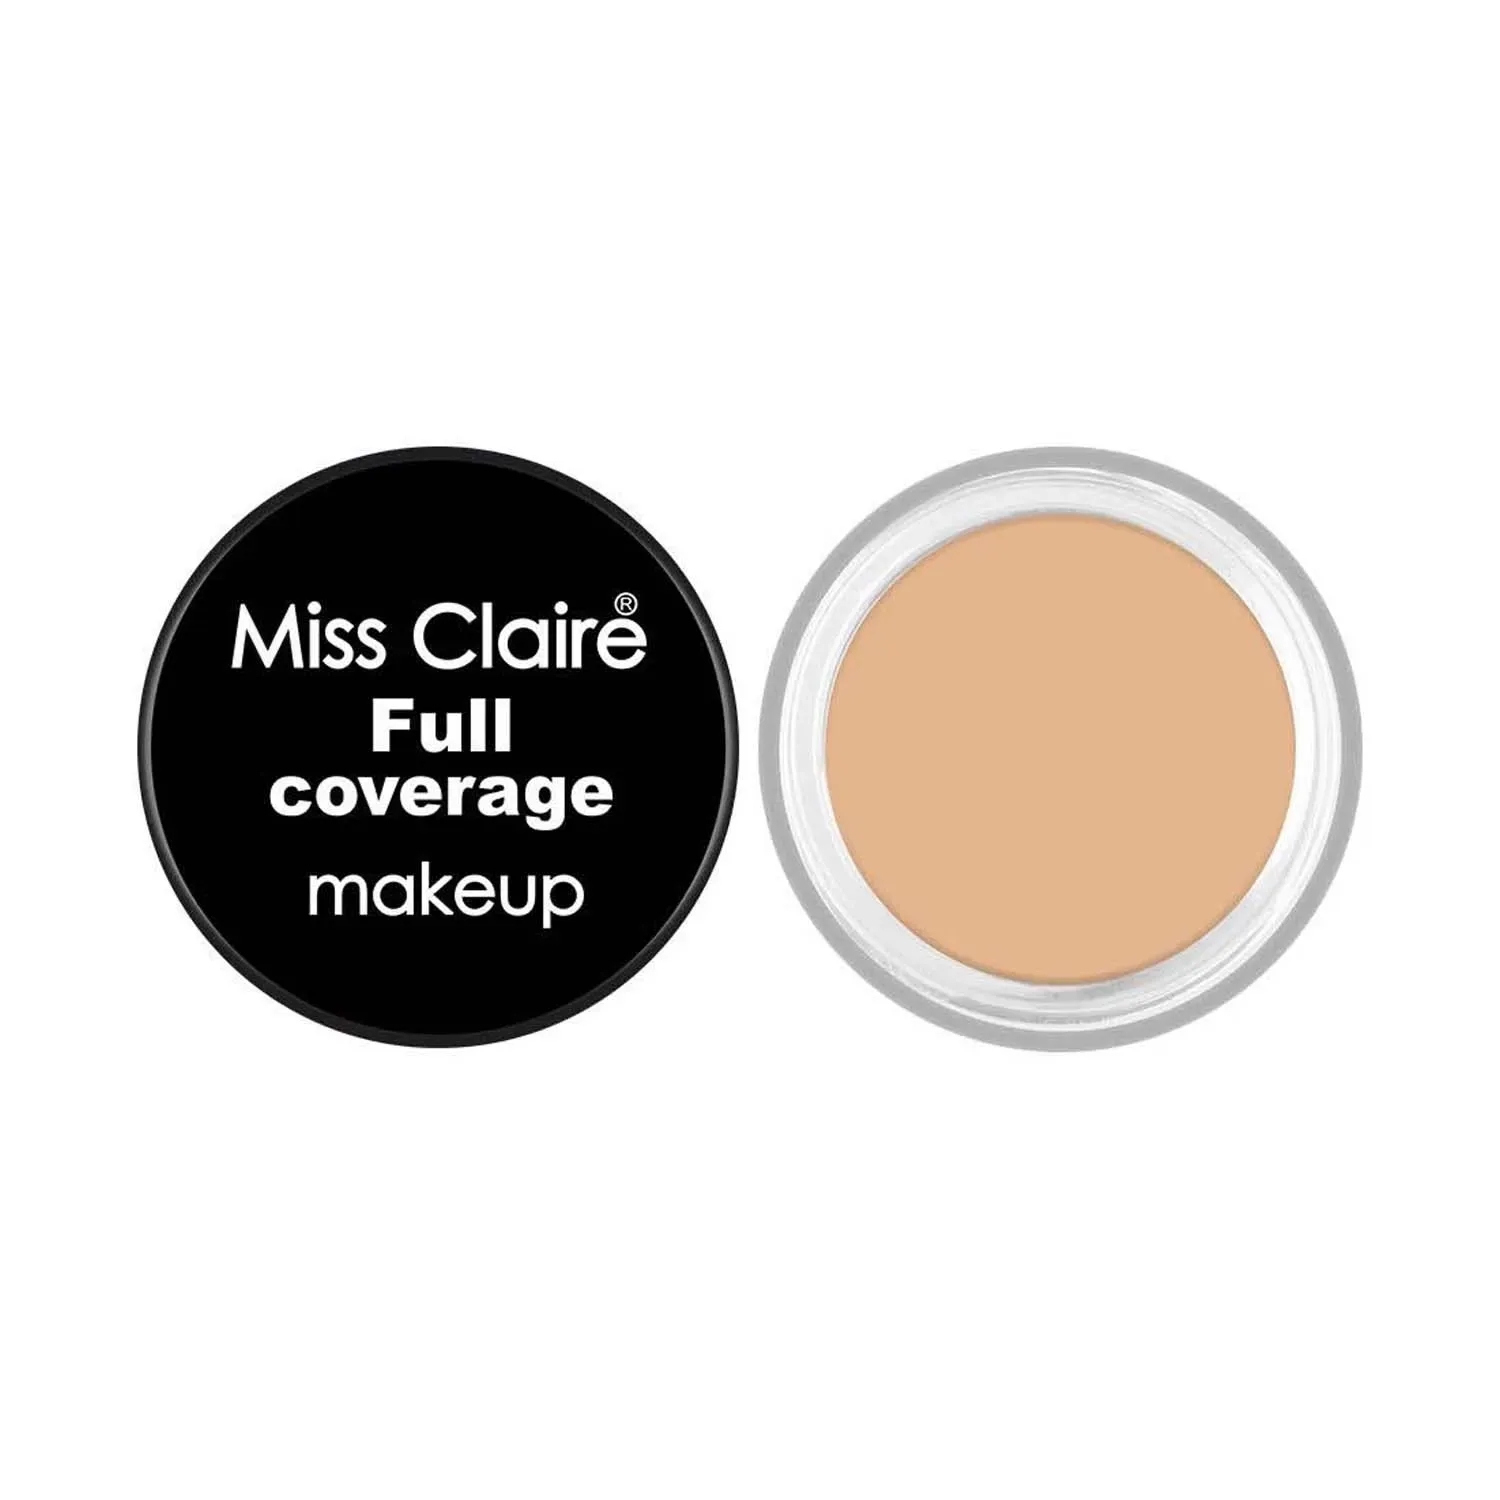 Miss Claire Full Coverage Makeup + Concealer - 2 Fair (6g)